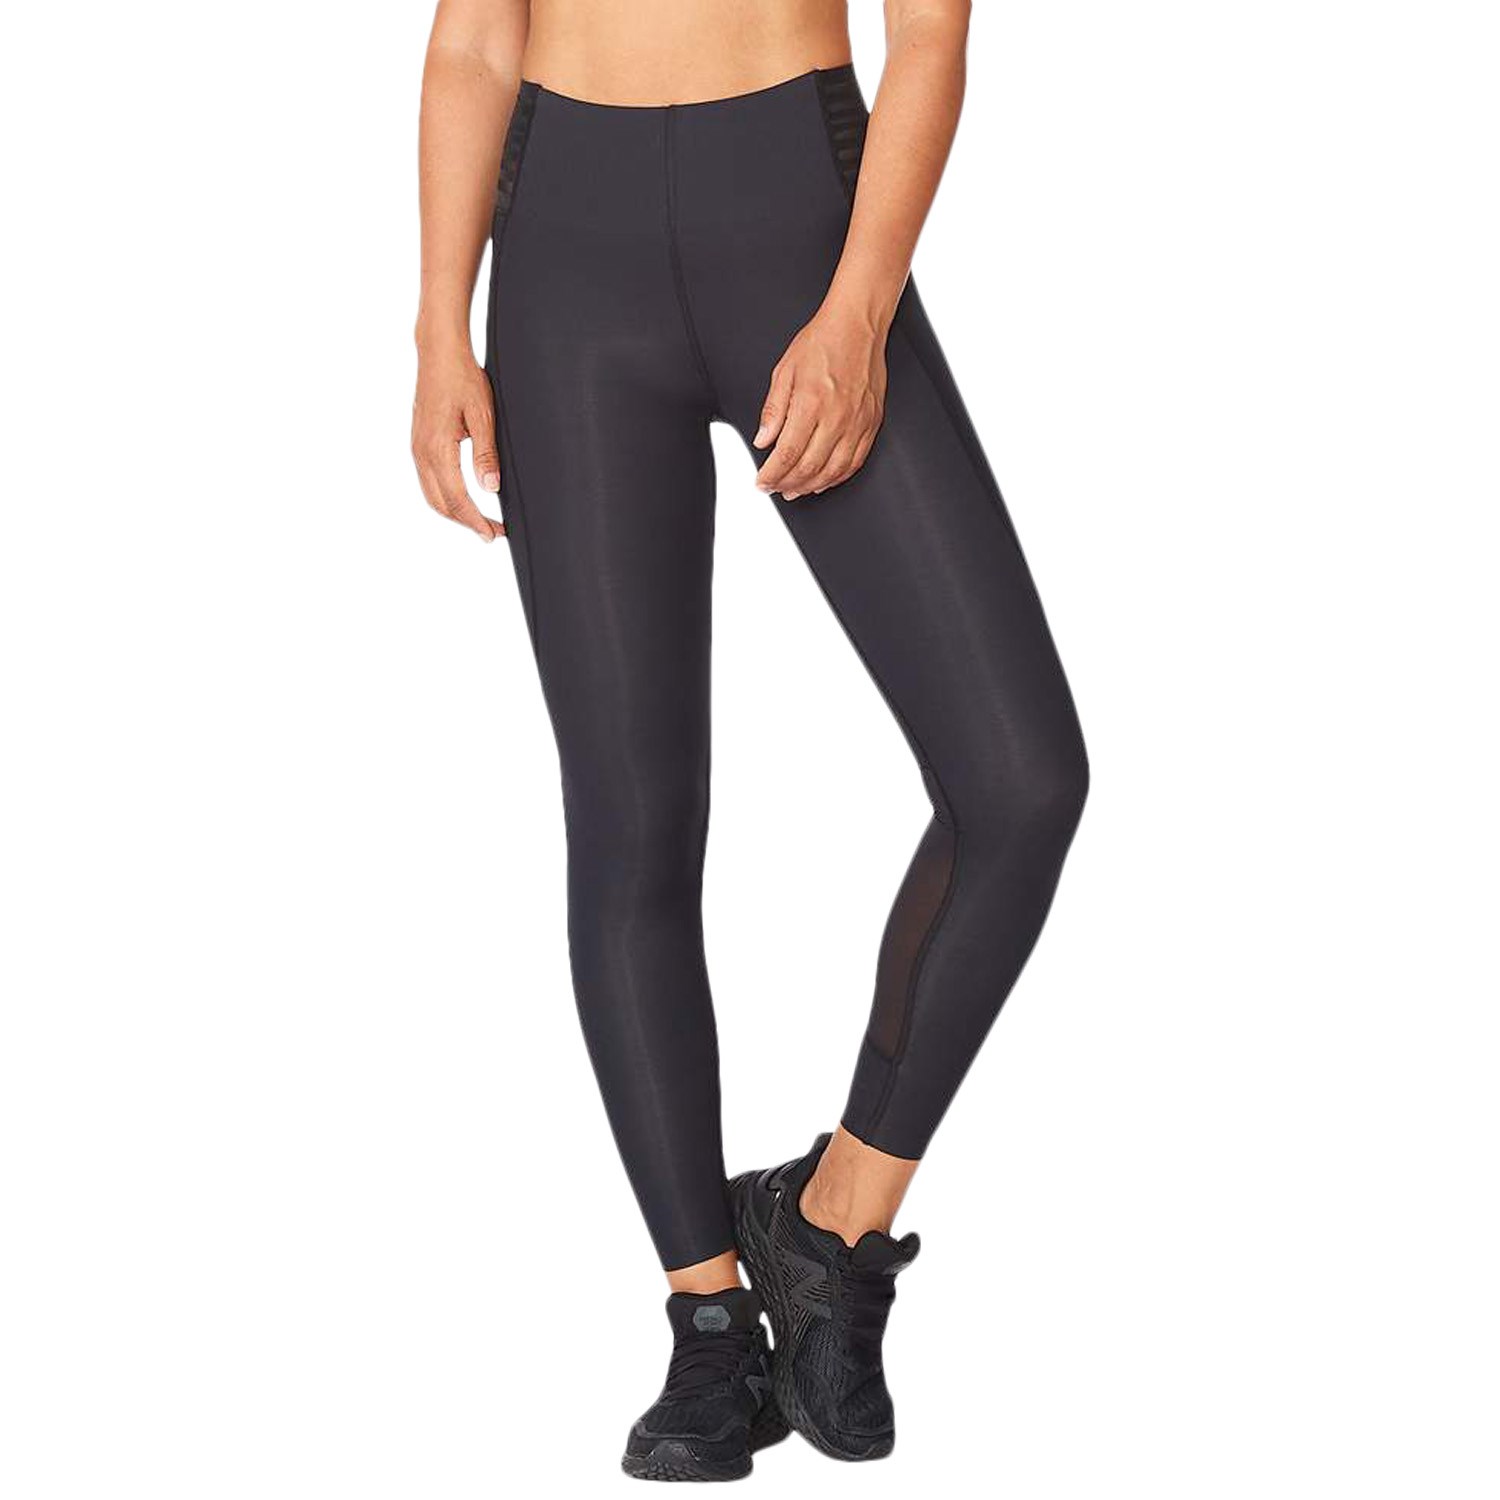 Buy 2XU Women Motion Shape Hi-Rise Compression Tights online from